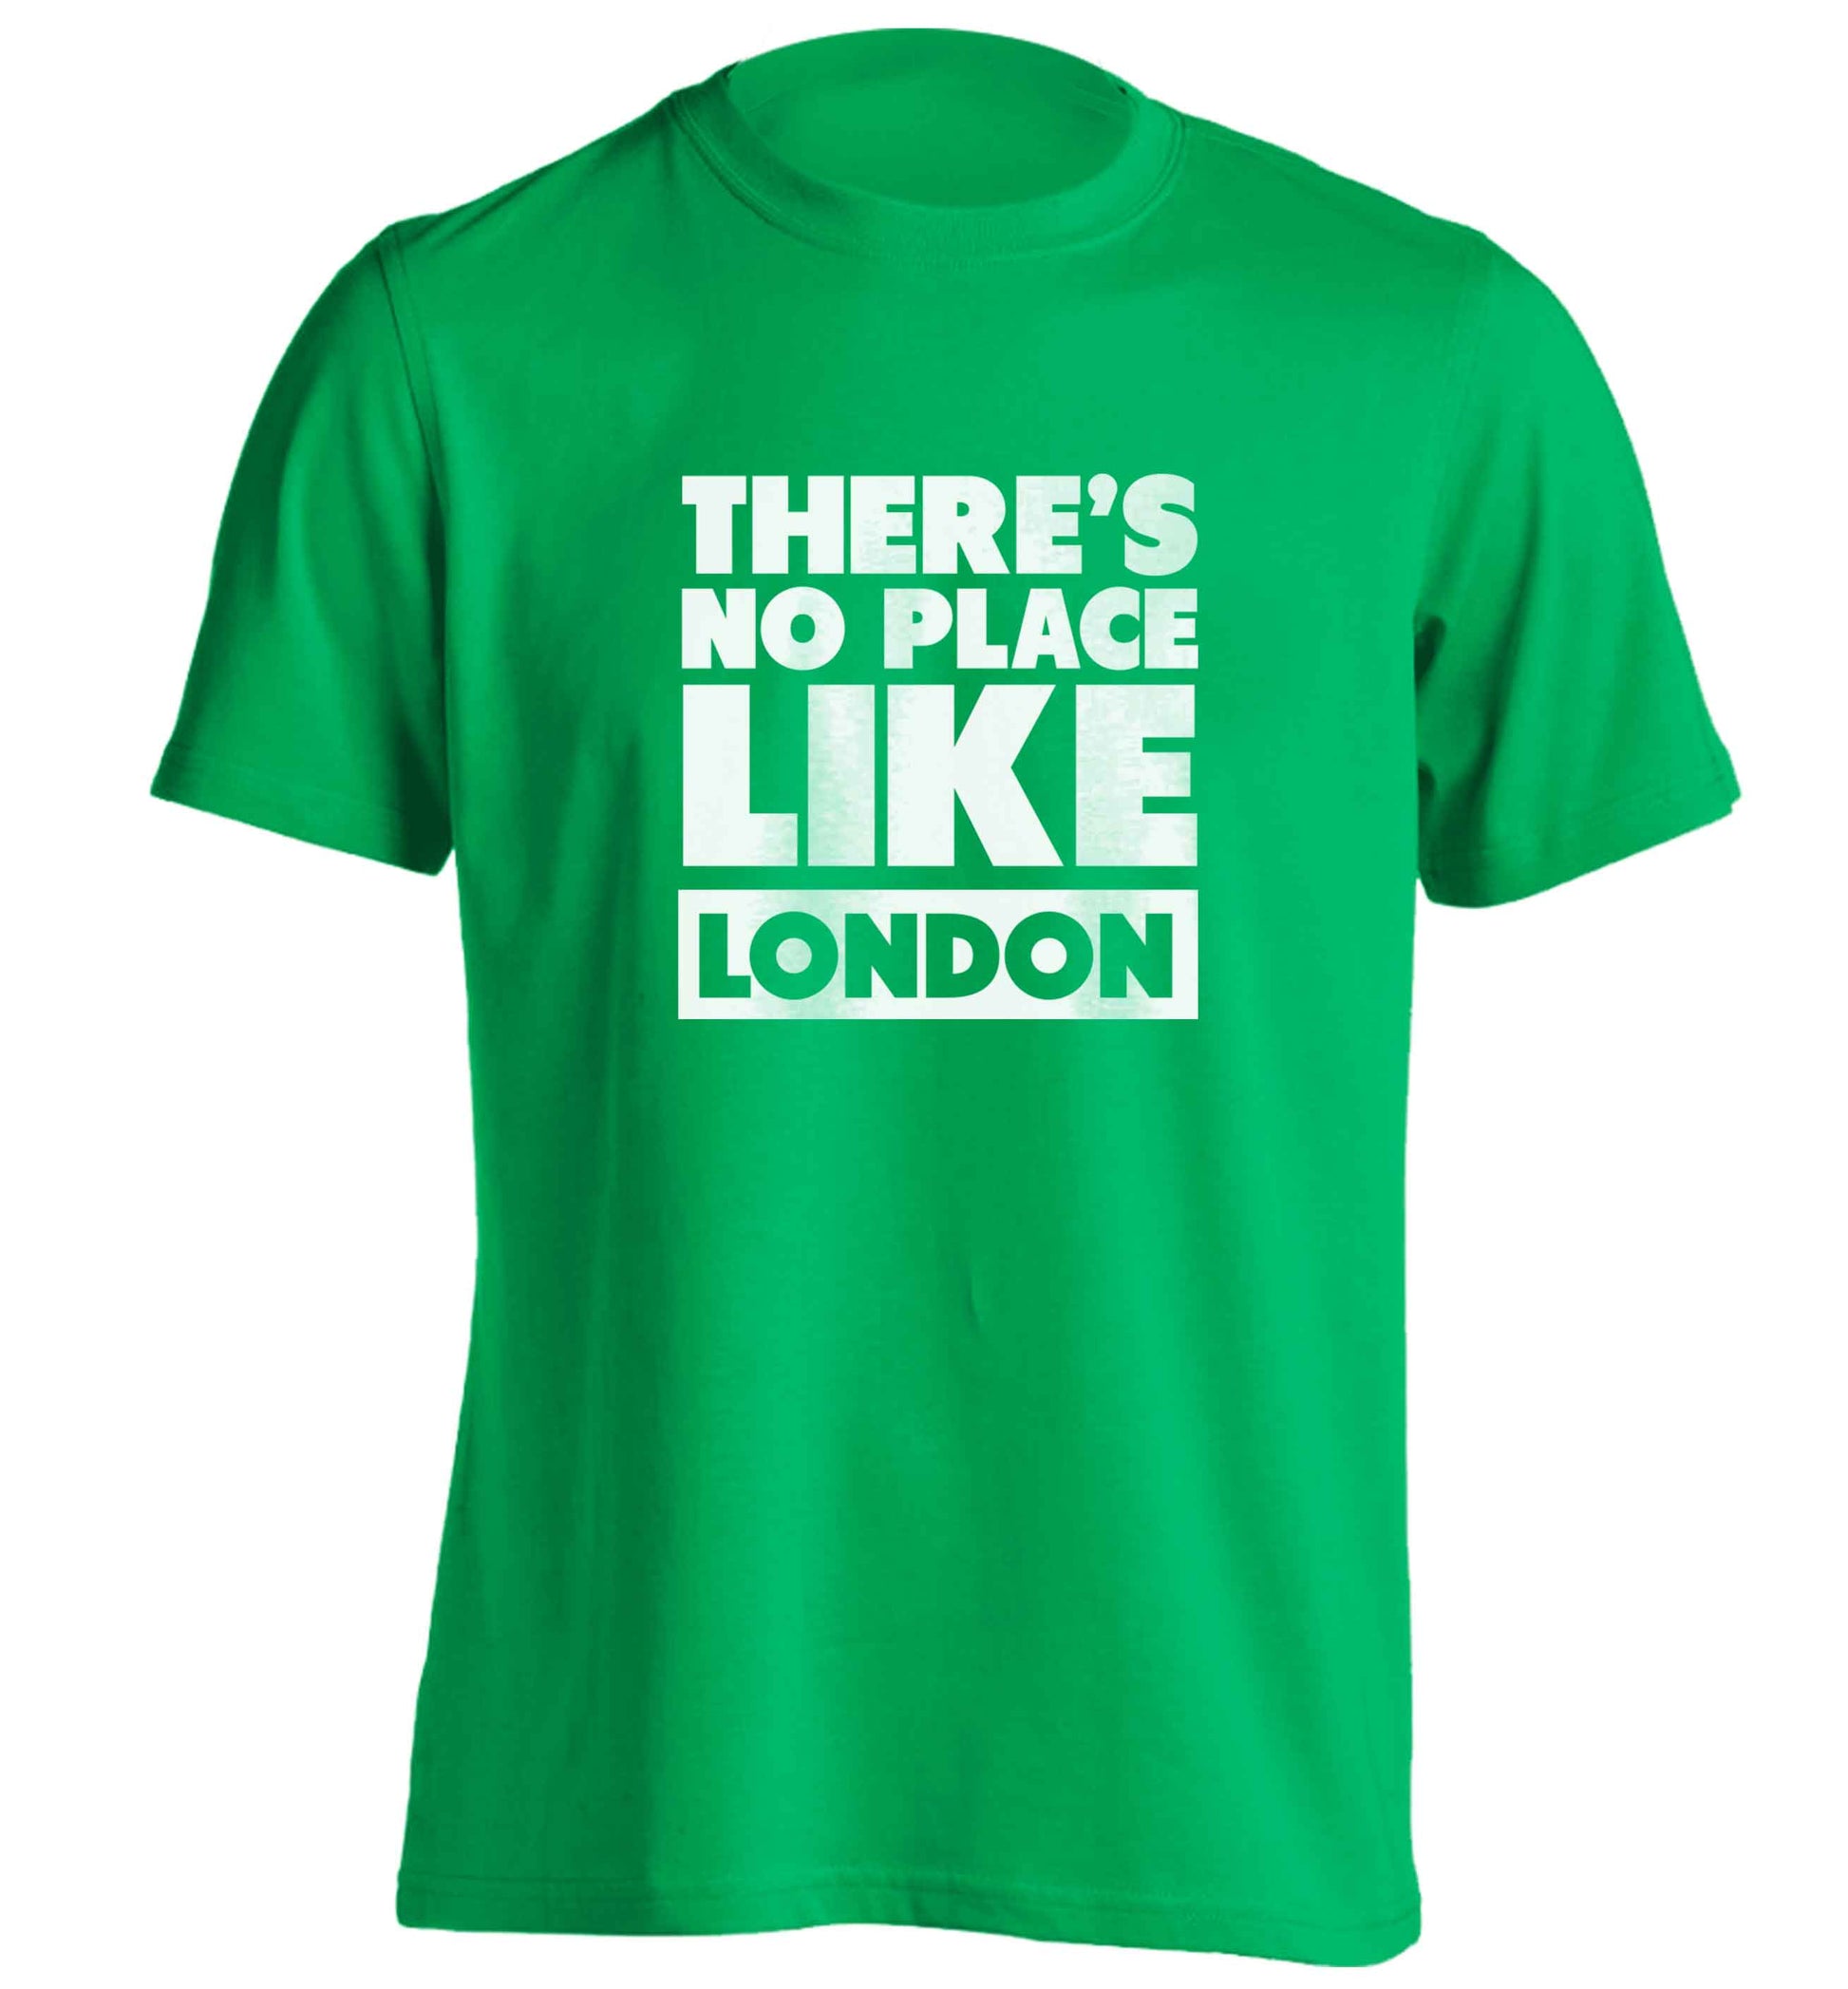 There's no place like England adults unisex green Tshirt 2XL